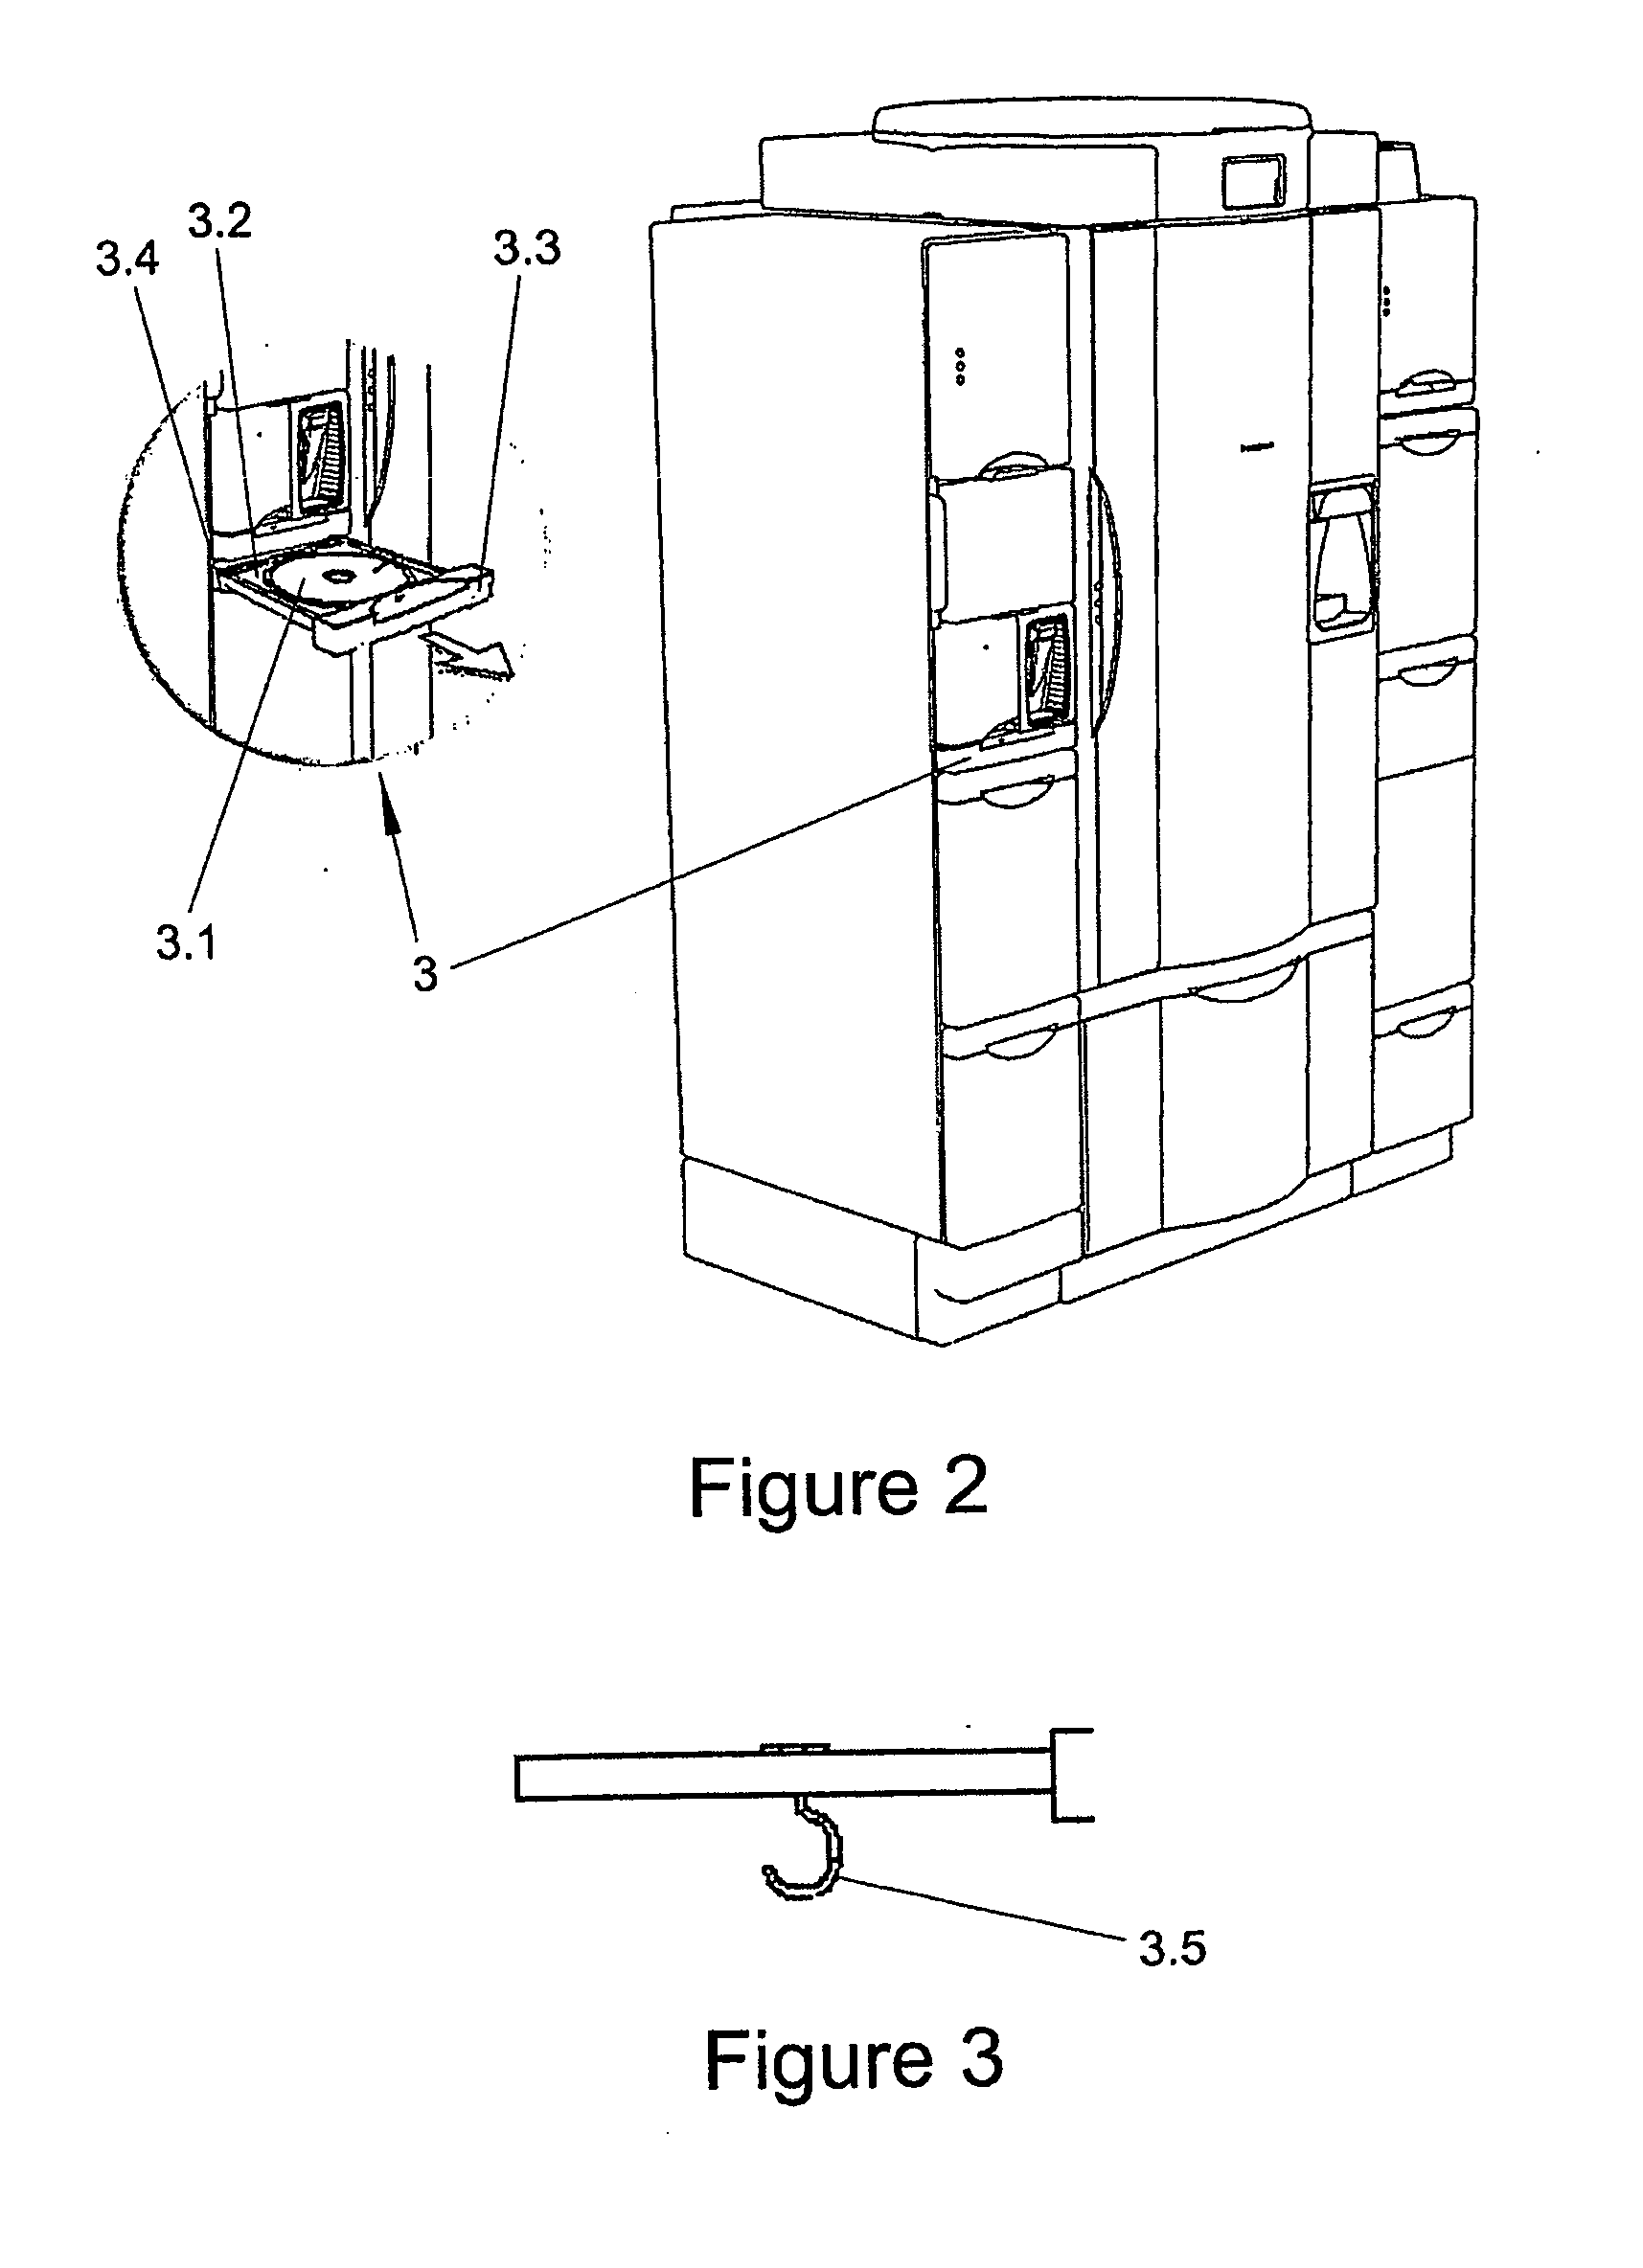 Refrigerator capable of stock monitoring by providing ideal storage conditions